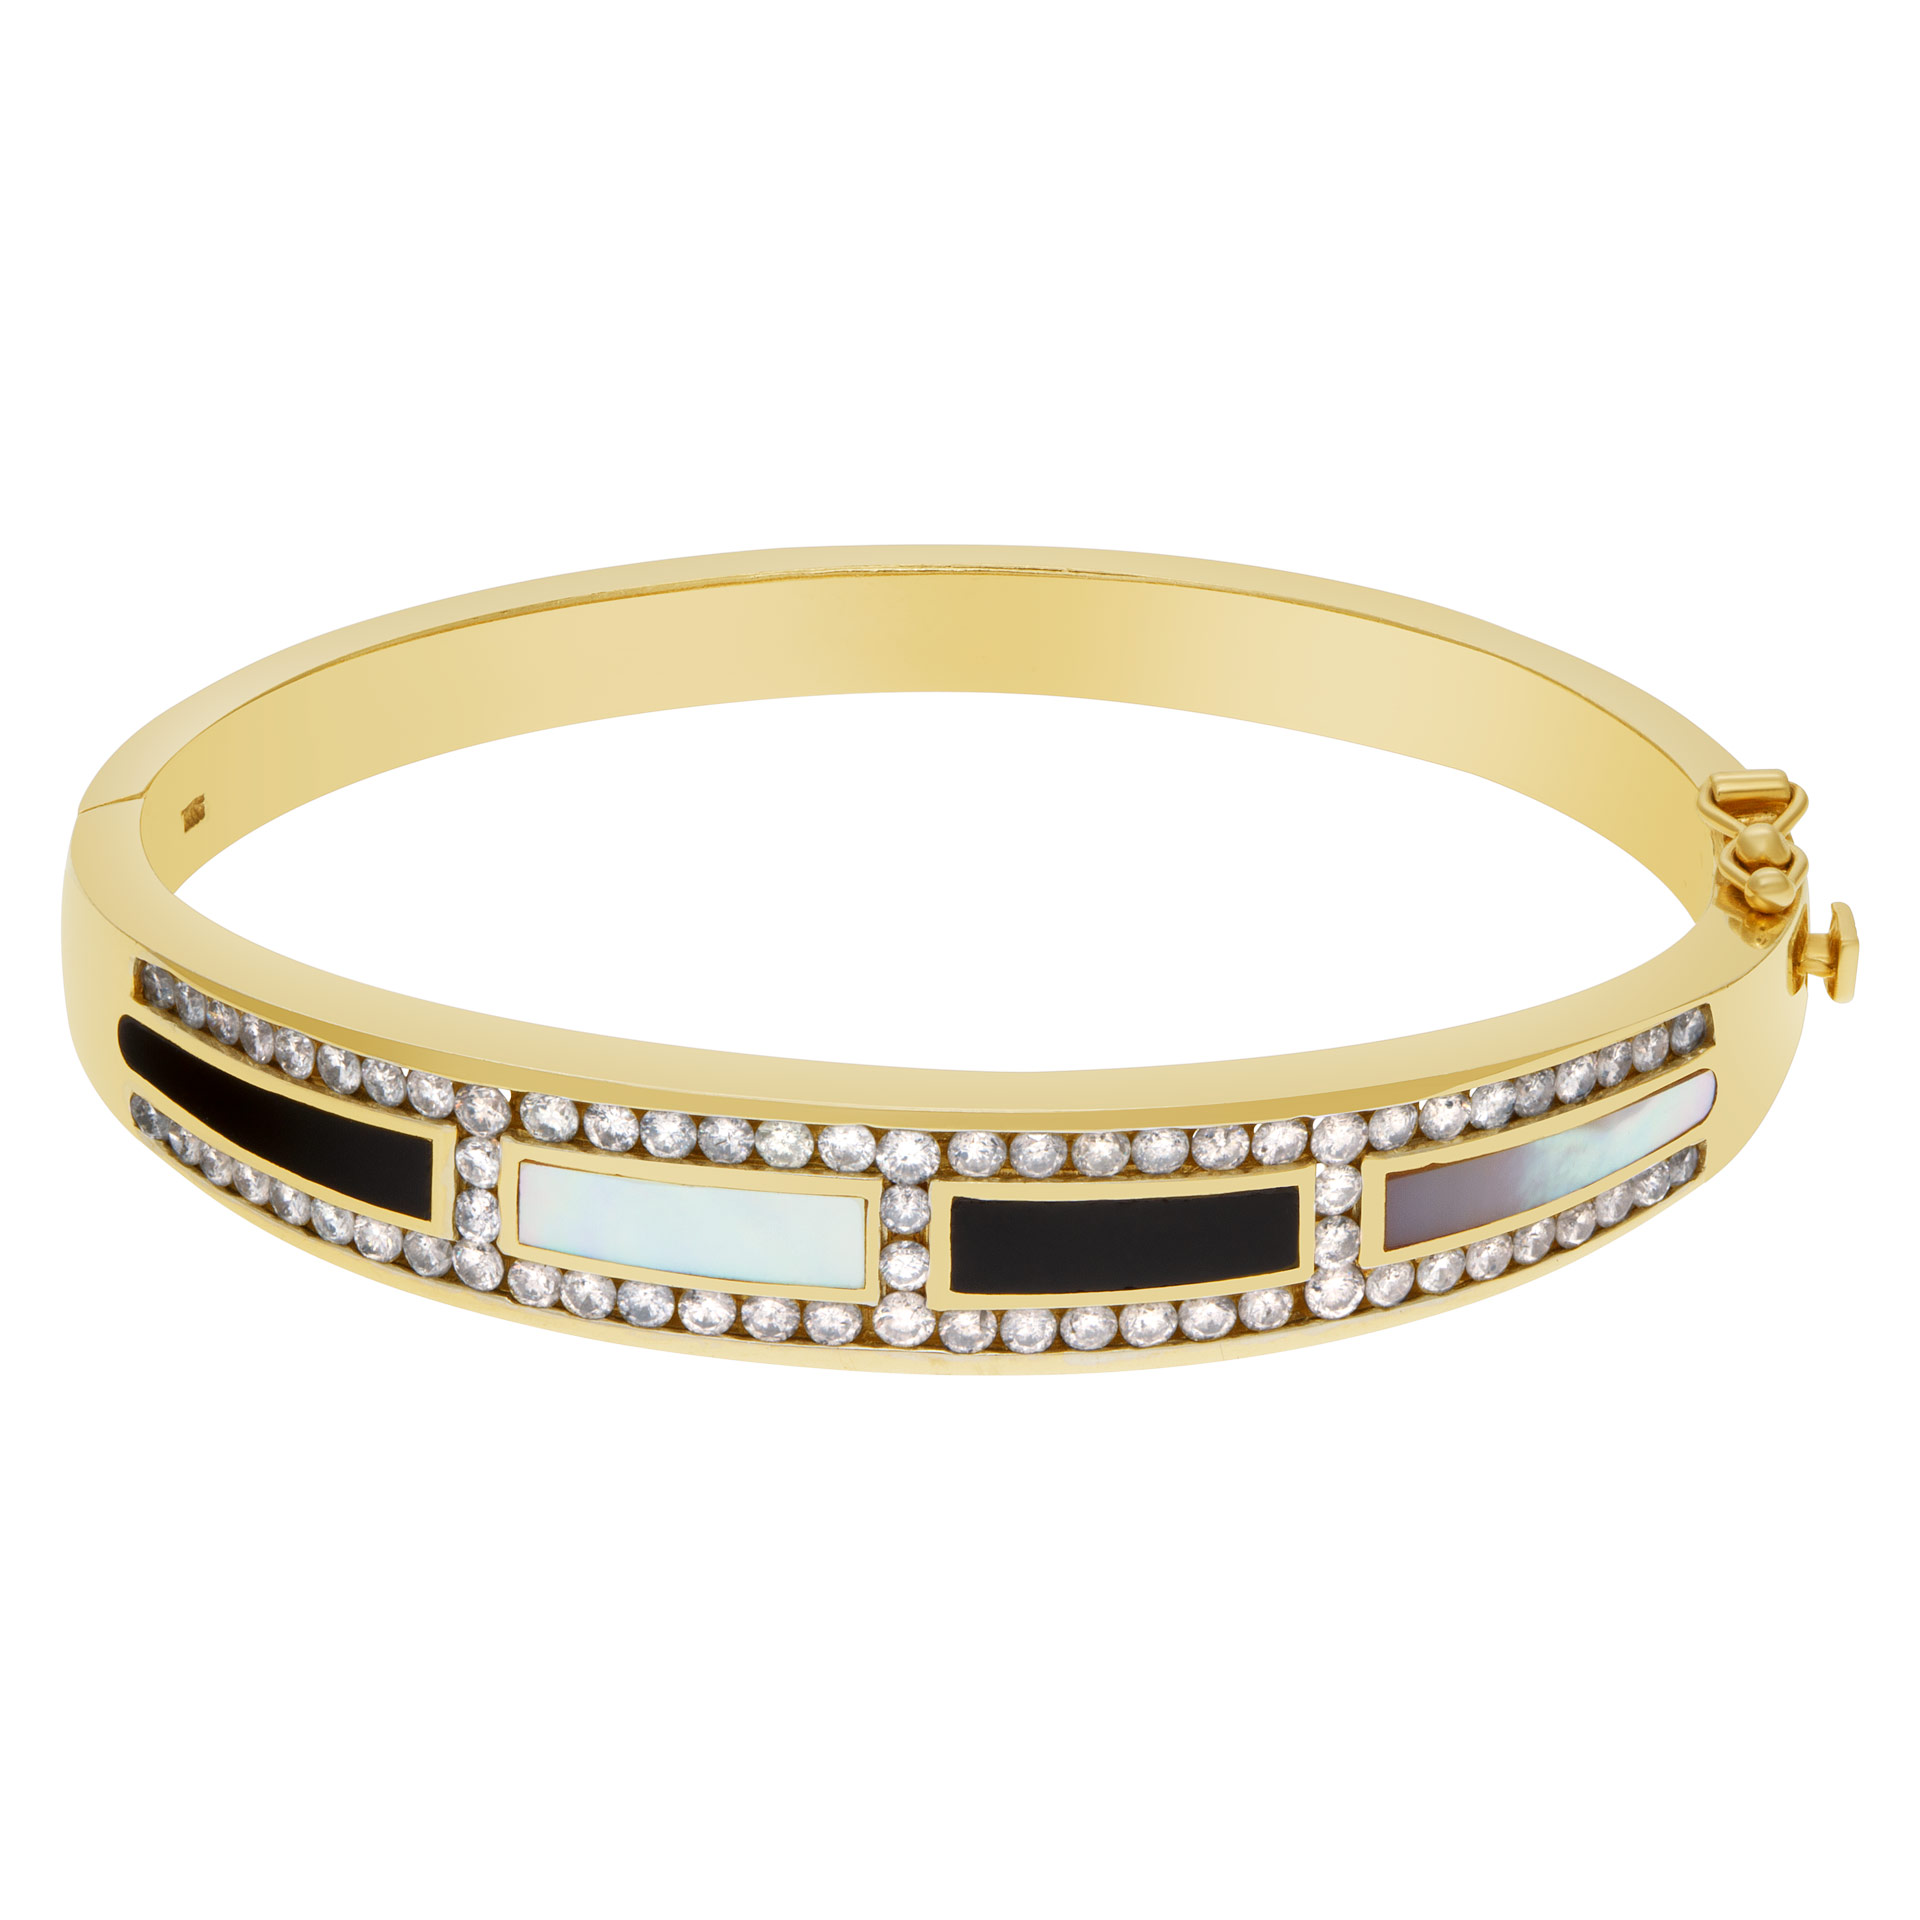 Regal diamond bangle in 14k with mother of pearl, black onyx inlay and diamonds